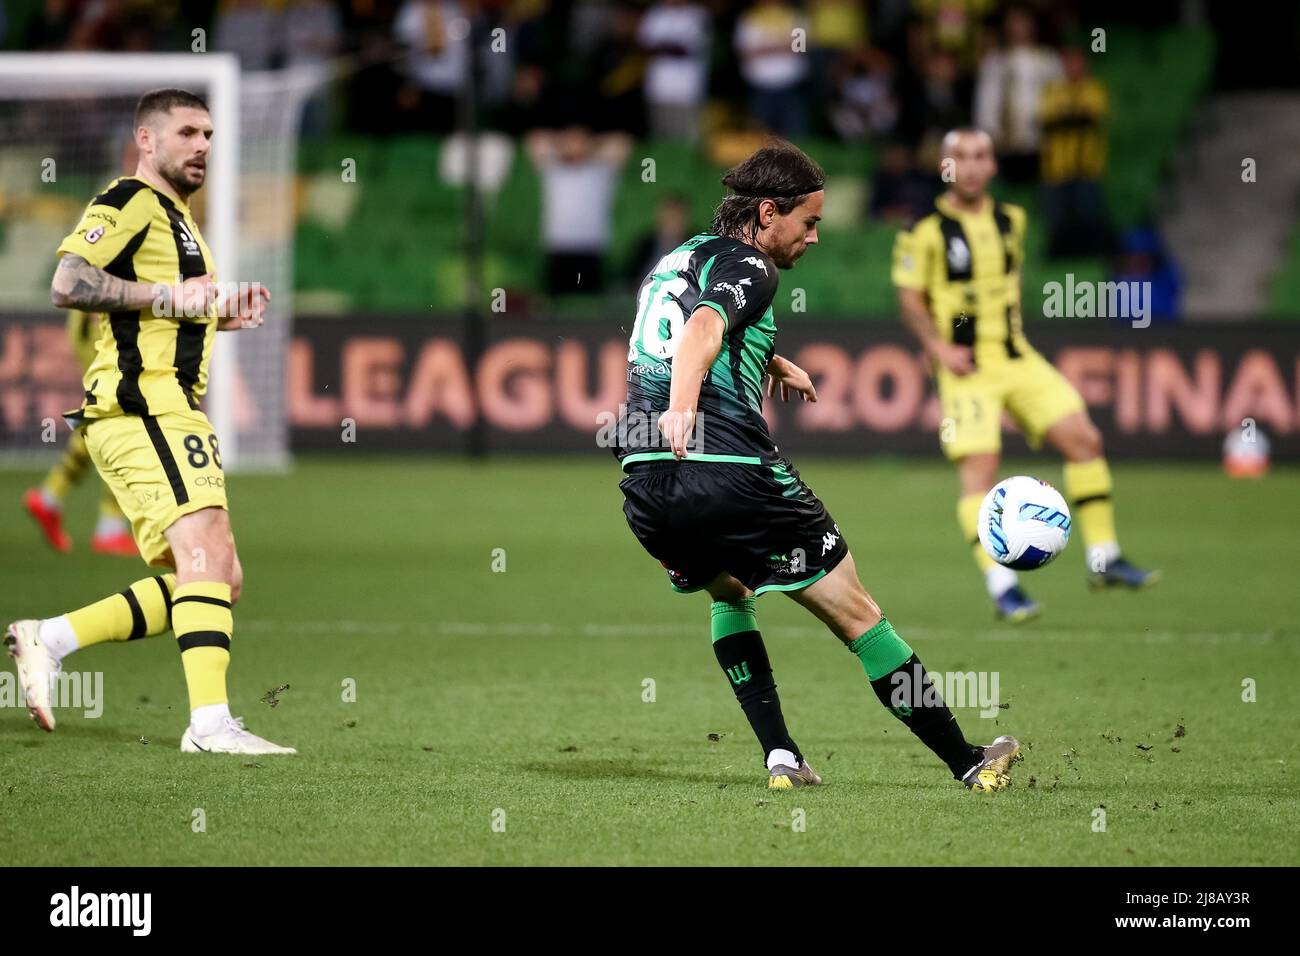 Melbourne, Australia, 14 May, 2022. Rene Krhin of Western United kicks the ball  during the A-League Elimination Final soccer match between Western United and Wellington Phoenix at AAMI Park on May 14, 2022 in Melbourne, Australia. Credit: Dave Hewison/Speed Media/Alamy Live News Stock Photo